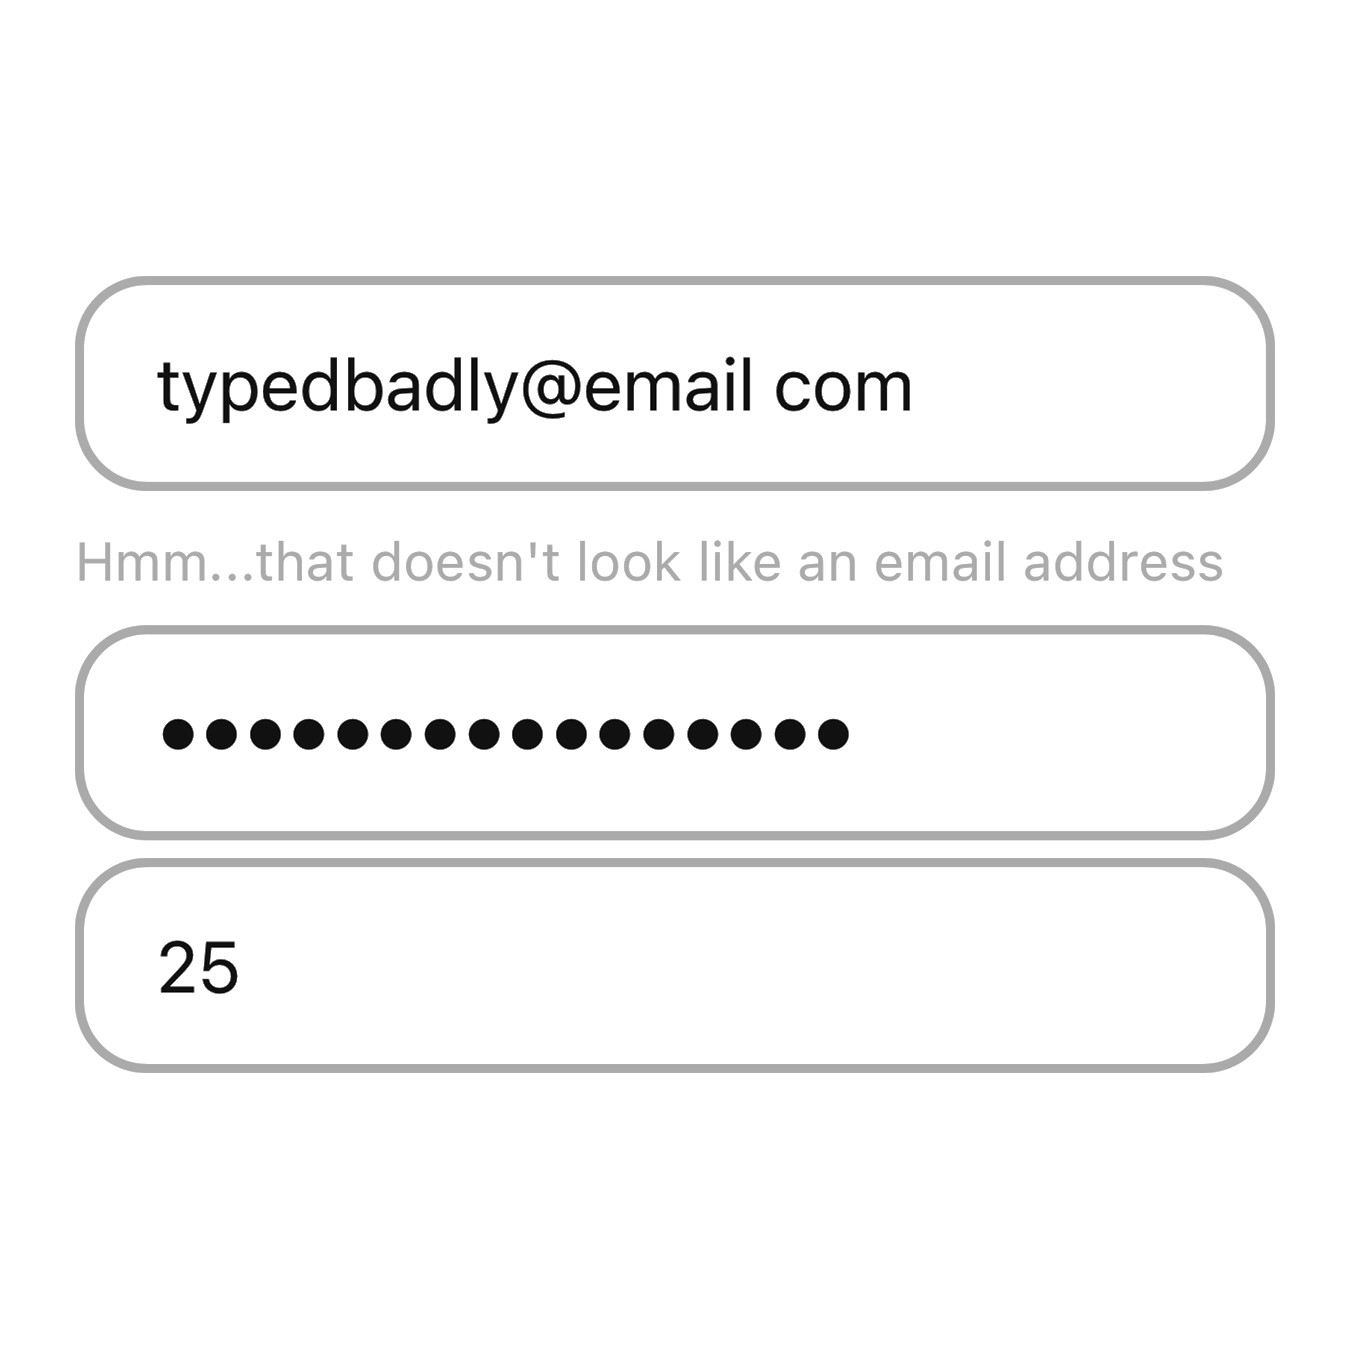 A webform where an input asking for the user’s email address was typed improperly. The image is in greyscale, removing the red color that many associate with an incomplete form, yet the viewer is able to see text underneath the email saying “Hmm...that doesn’t look like an email address,” which helps with any colorblind users.